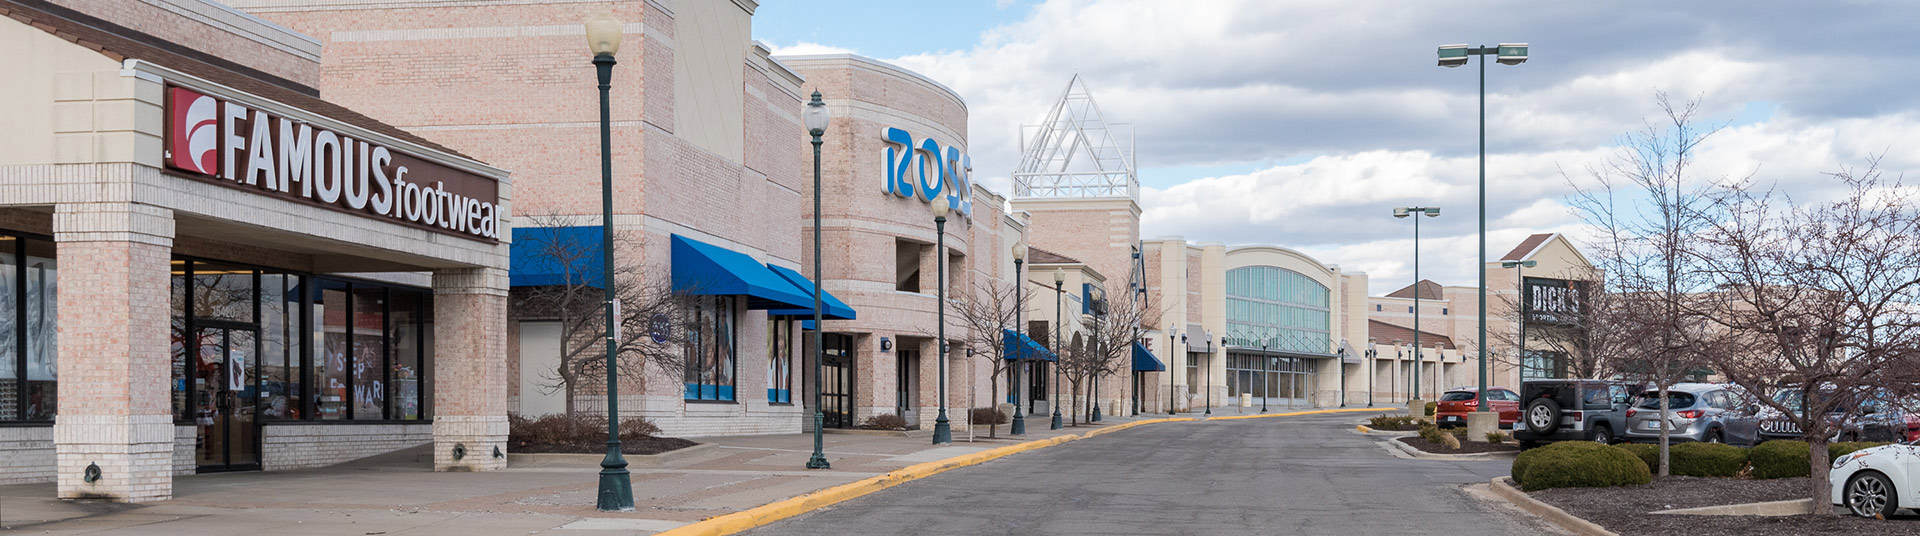 A strip mall featuring Famous Footwear, Ross, and Dick's Sporting Goods